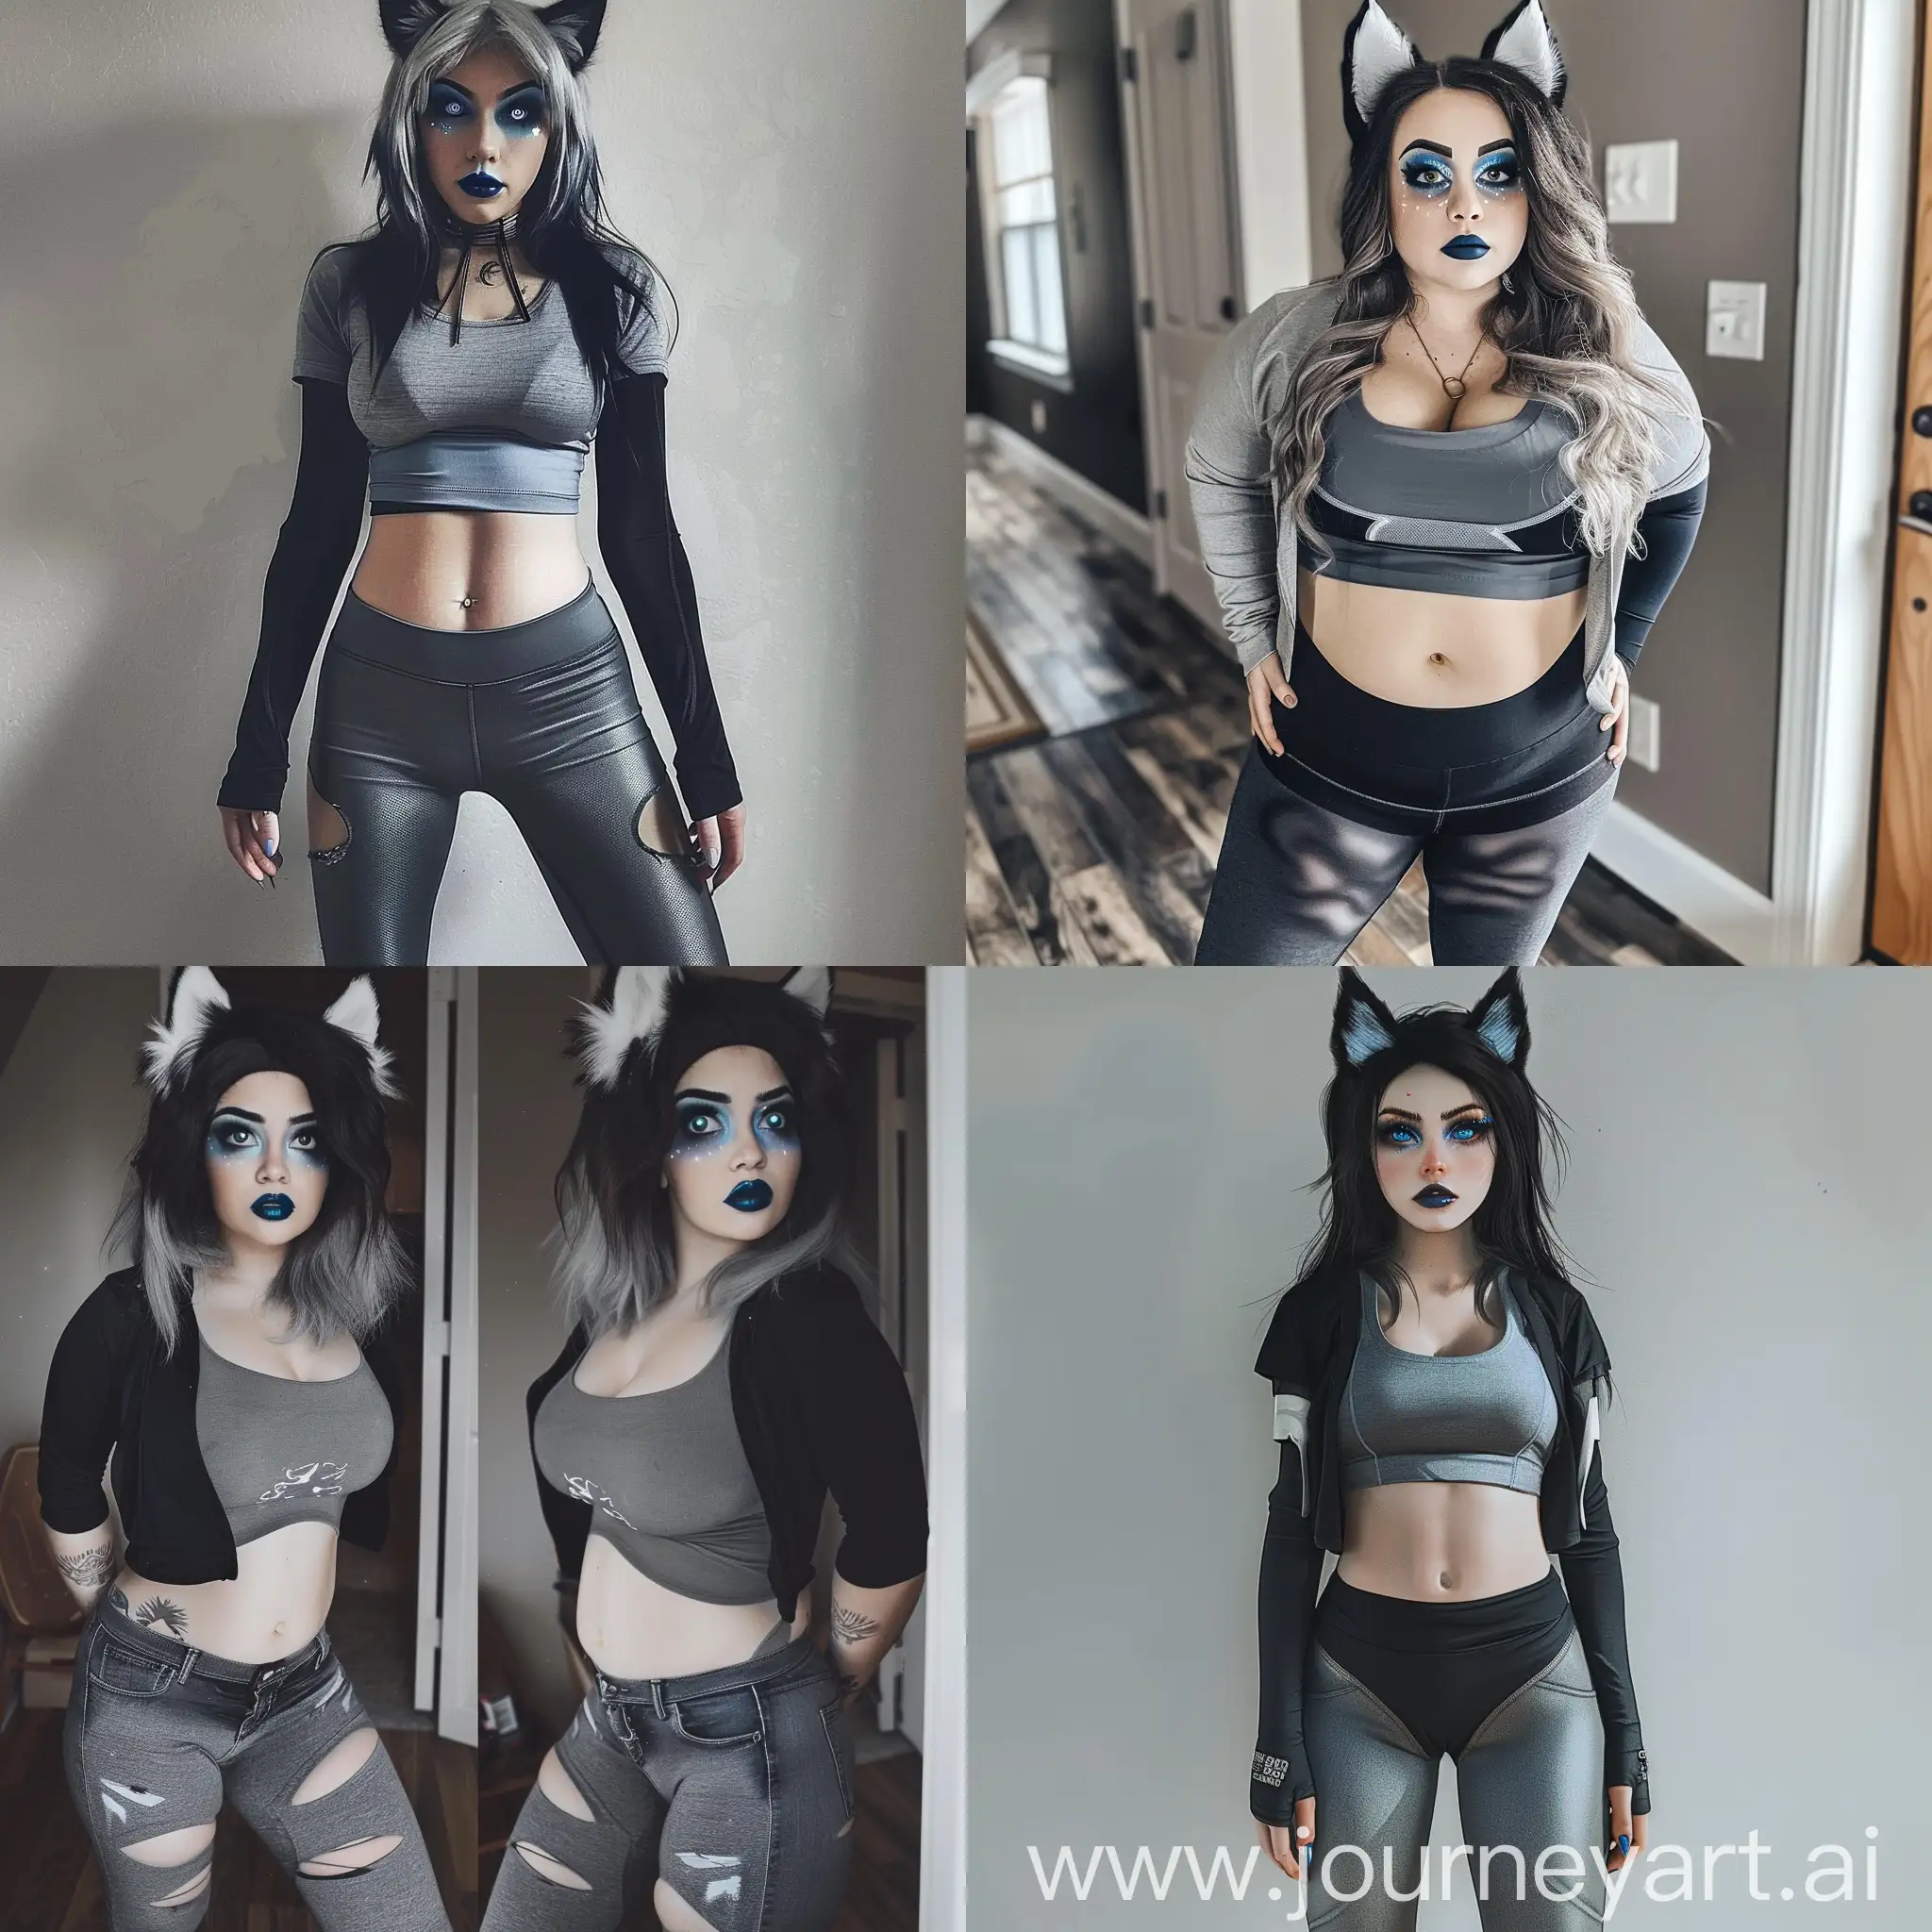 Girl in her 30s, slim waist, thunder thighs, round chest, short jeans, matte leggings, tight compression shirt with a gray crop top, long black wolfcut with white edges, galaxy eyes, dark blue lip stick